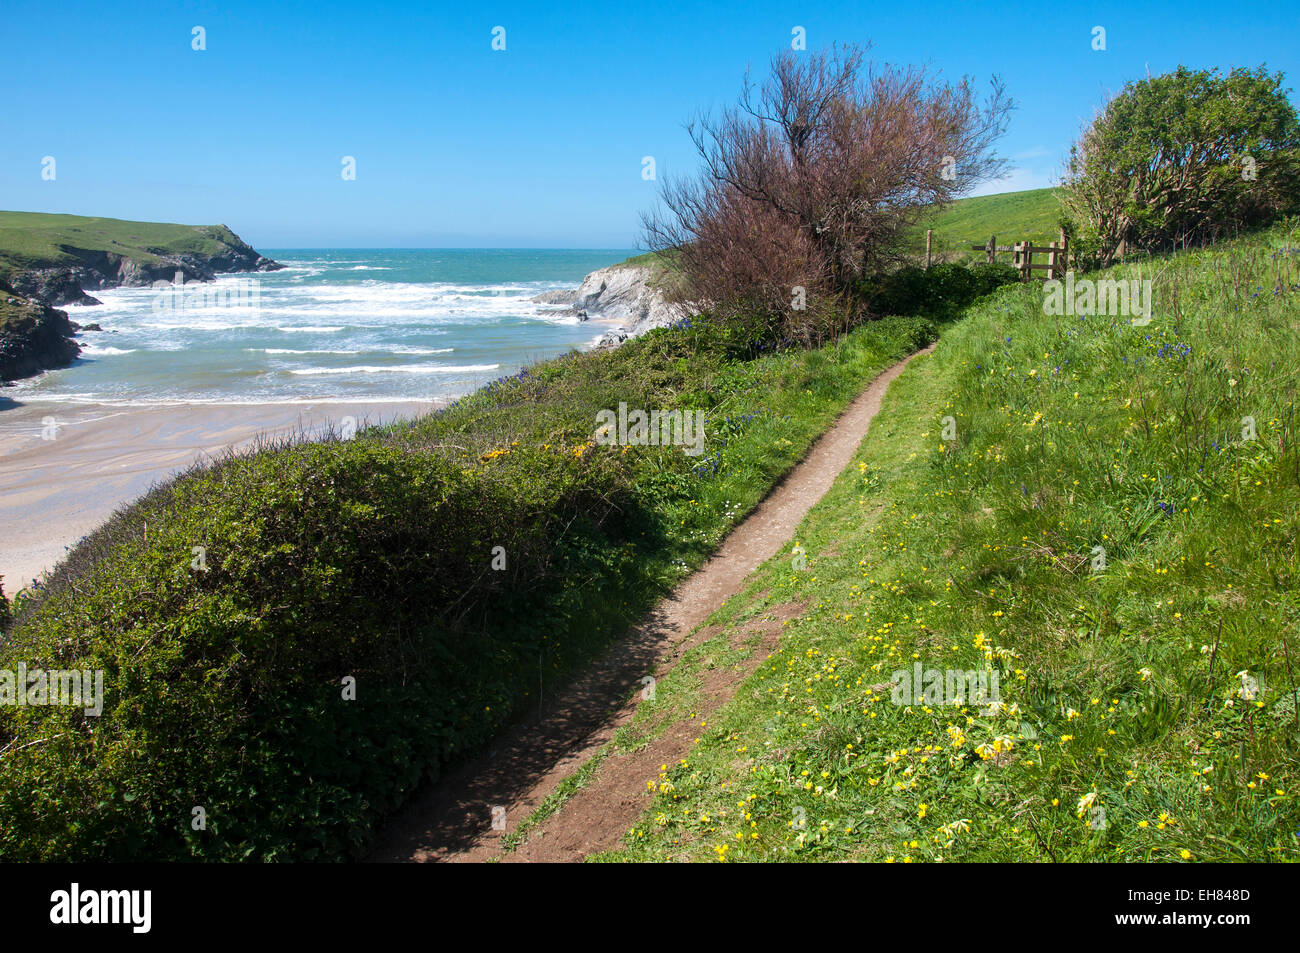 Polly Joke/Porth Joke beach near Newquay in Cornwall. A sunny spring day with the coastal path leading to a stile. Stock Photo